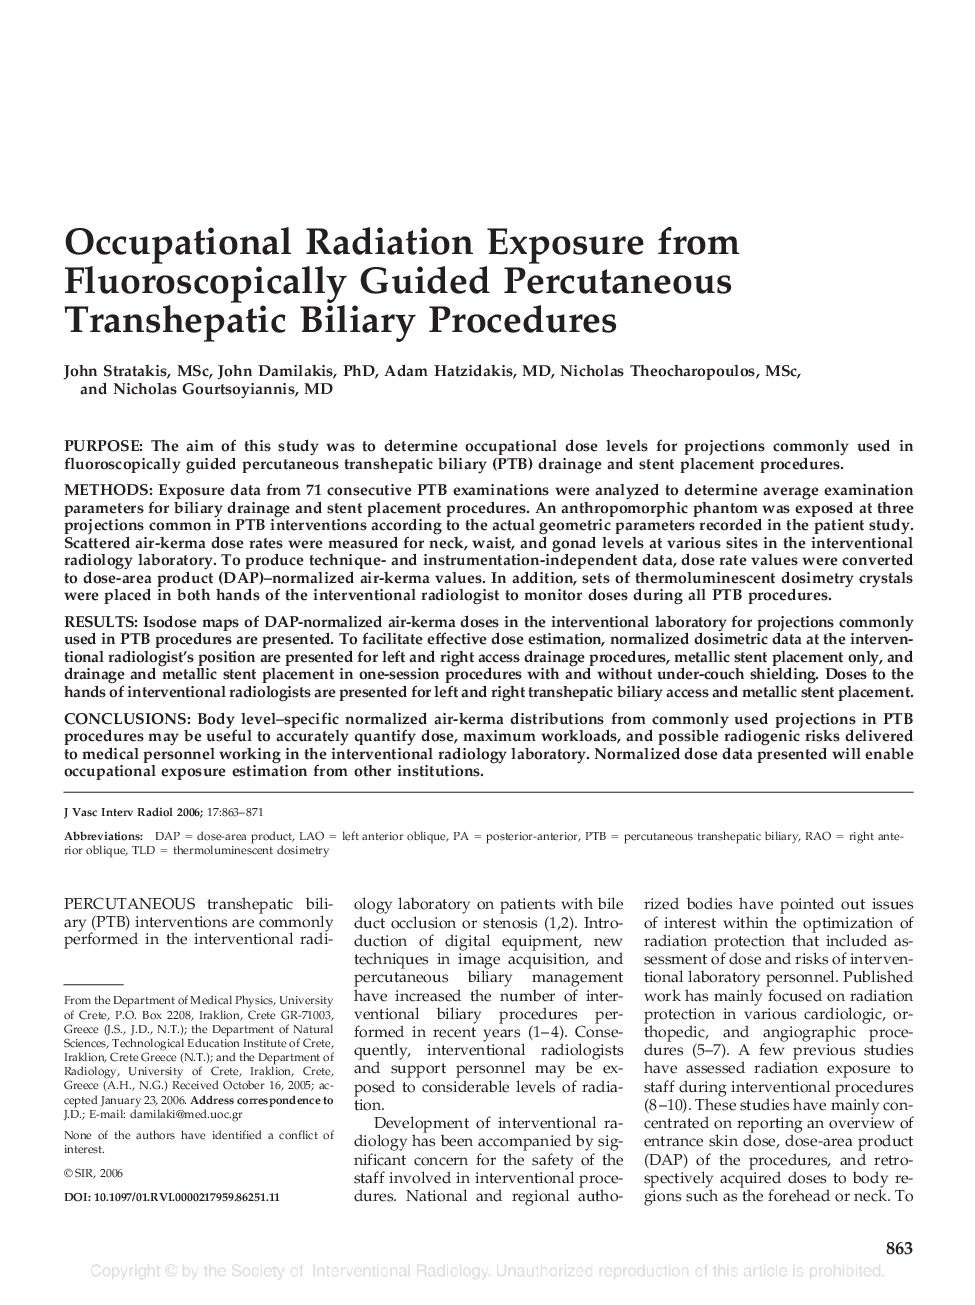 Occupational Radiation Exposure from Fluoroscopically Guided Percutaneous Transhepatic Biliary Procedures